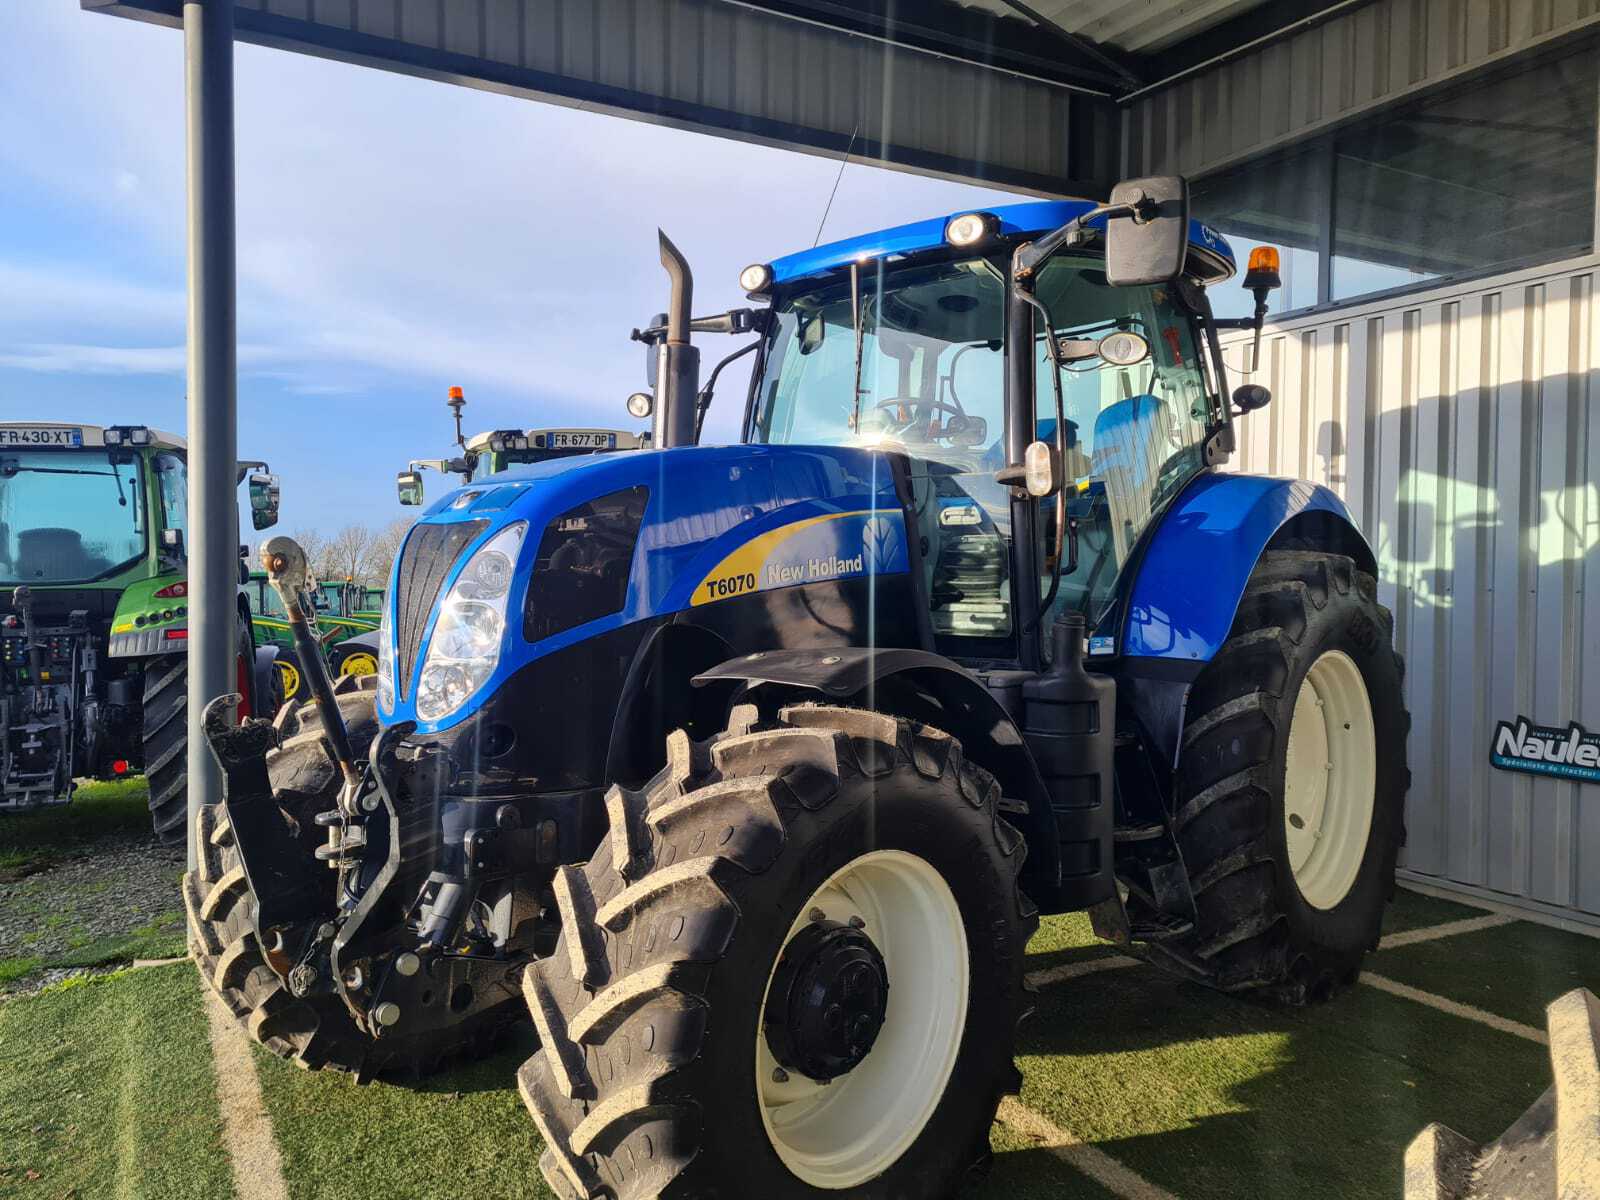 NEW HOLLAND T6070 PC